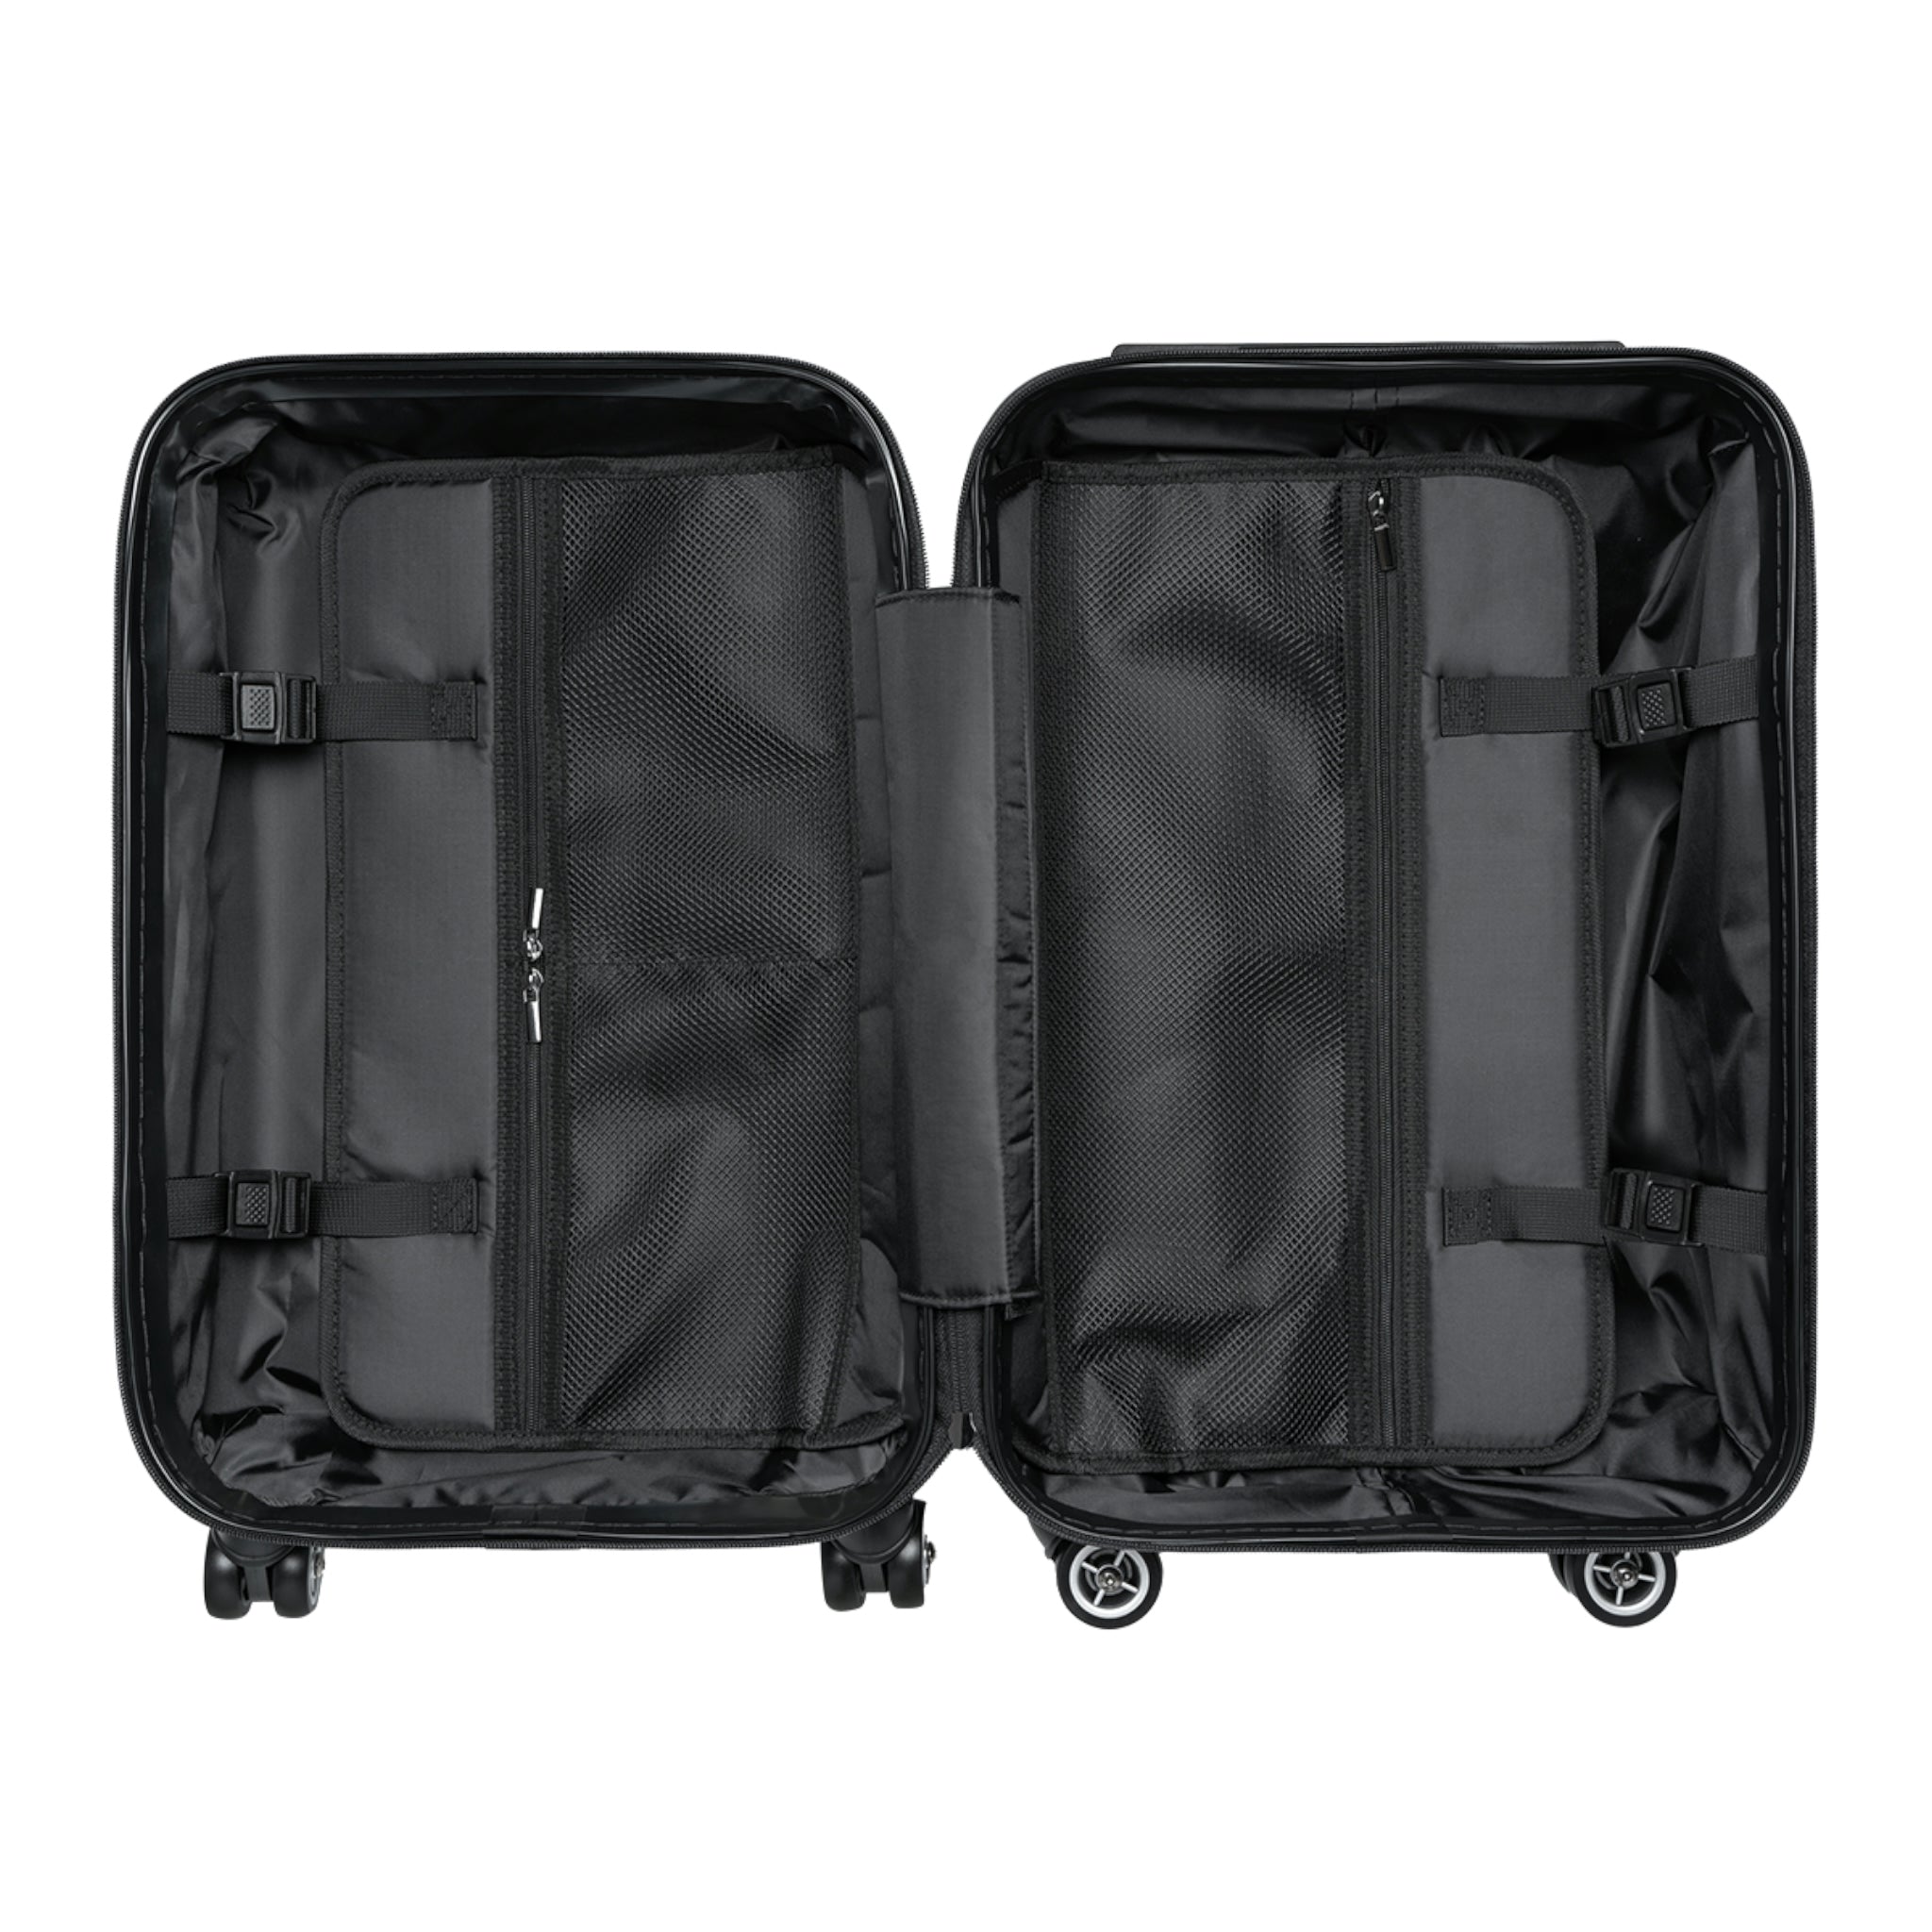 Nipin Blossom Sky Suitcases